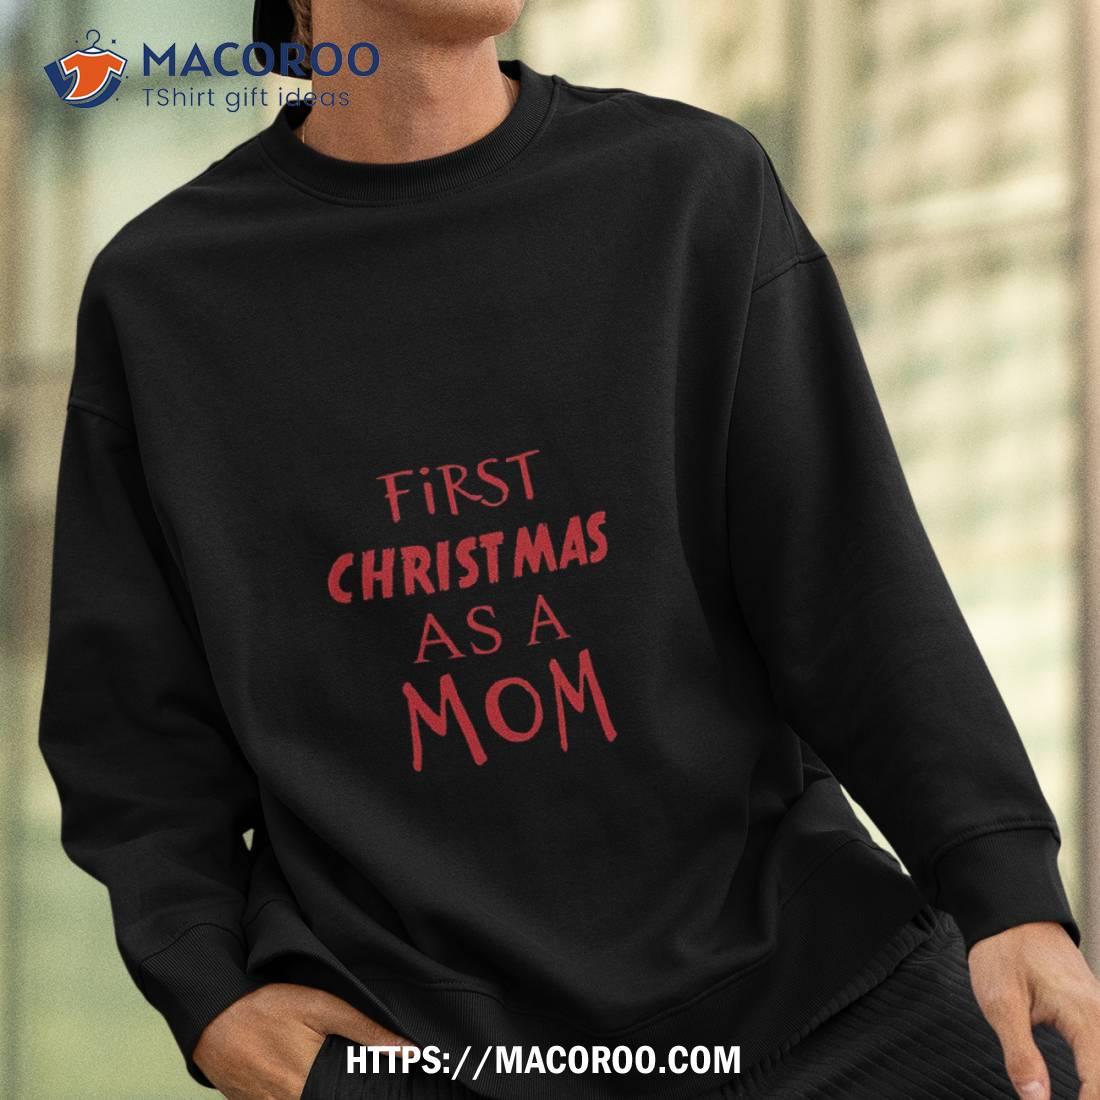 https://images.macoroo.com/wp-content/uploads/2023/08/first-christmas-as-a-mom-design-shirt-step-mom-gifts-for-christmas-sweatshirt.jpg